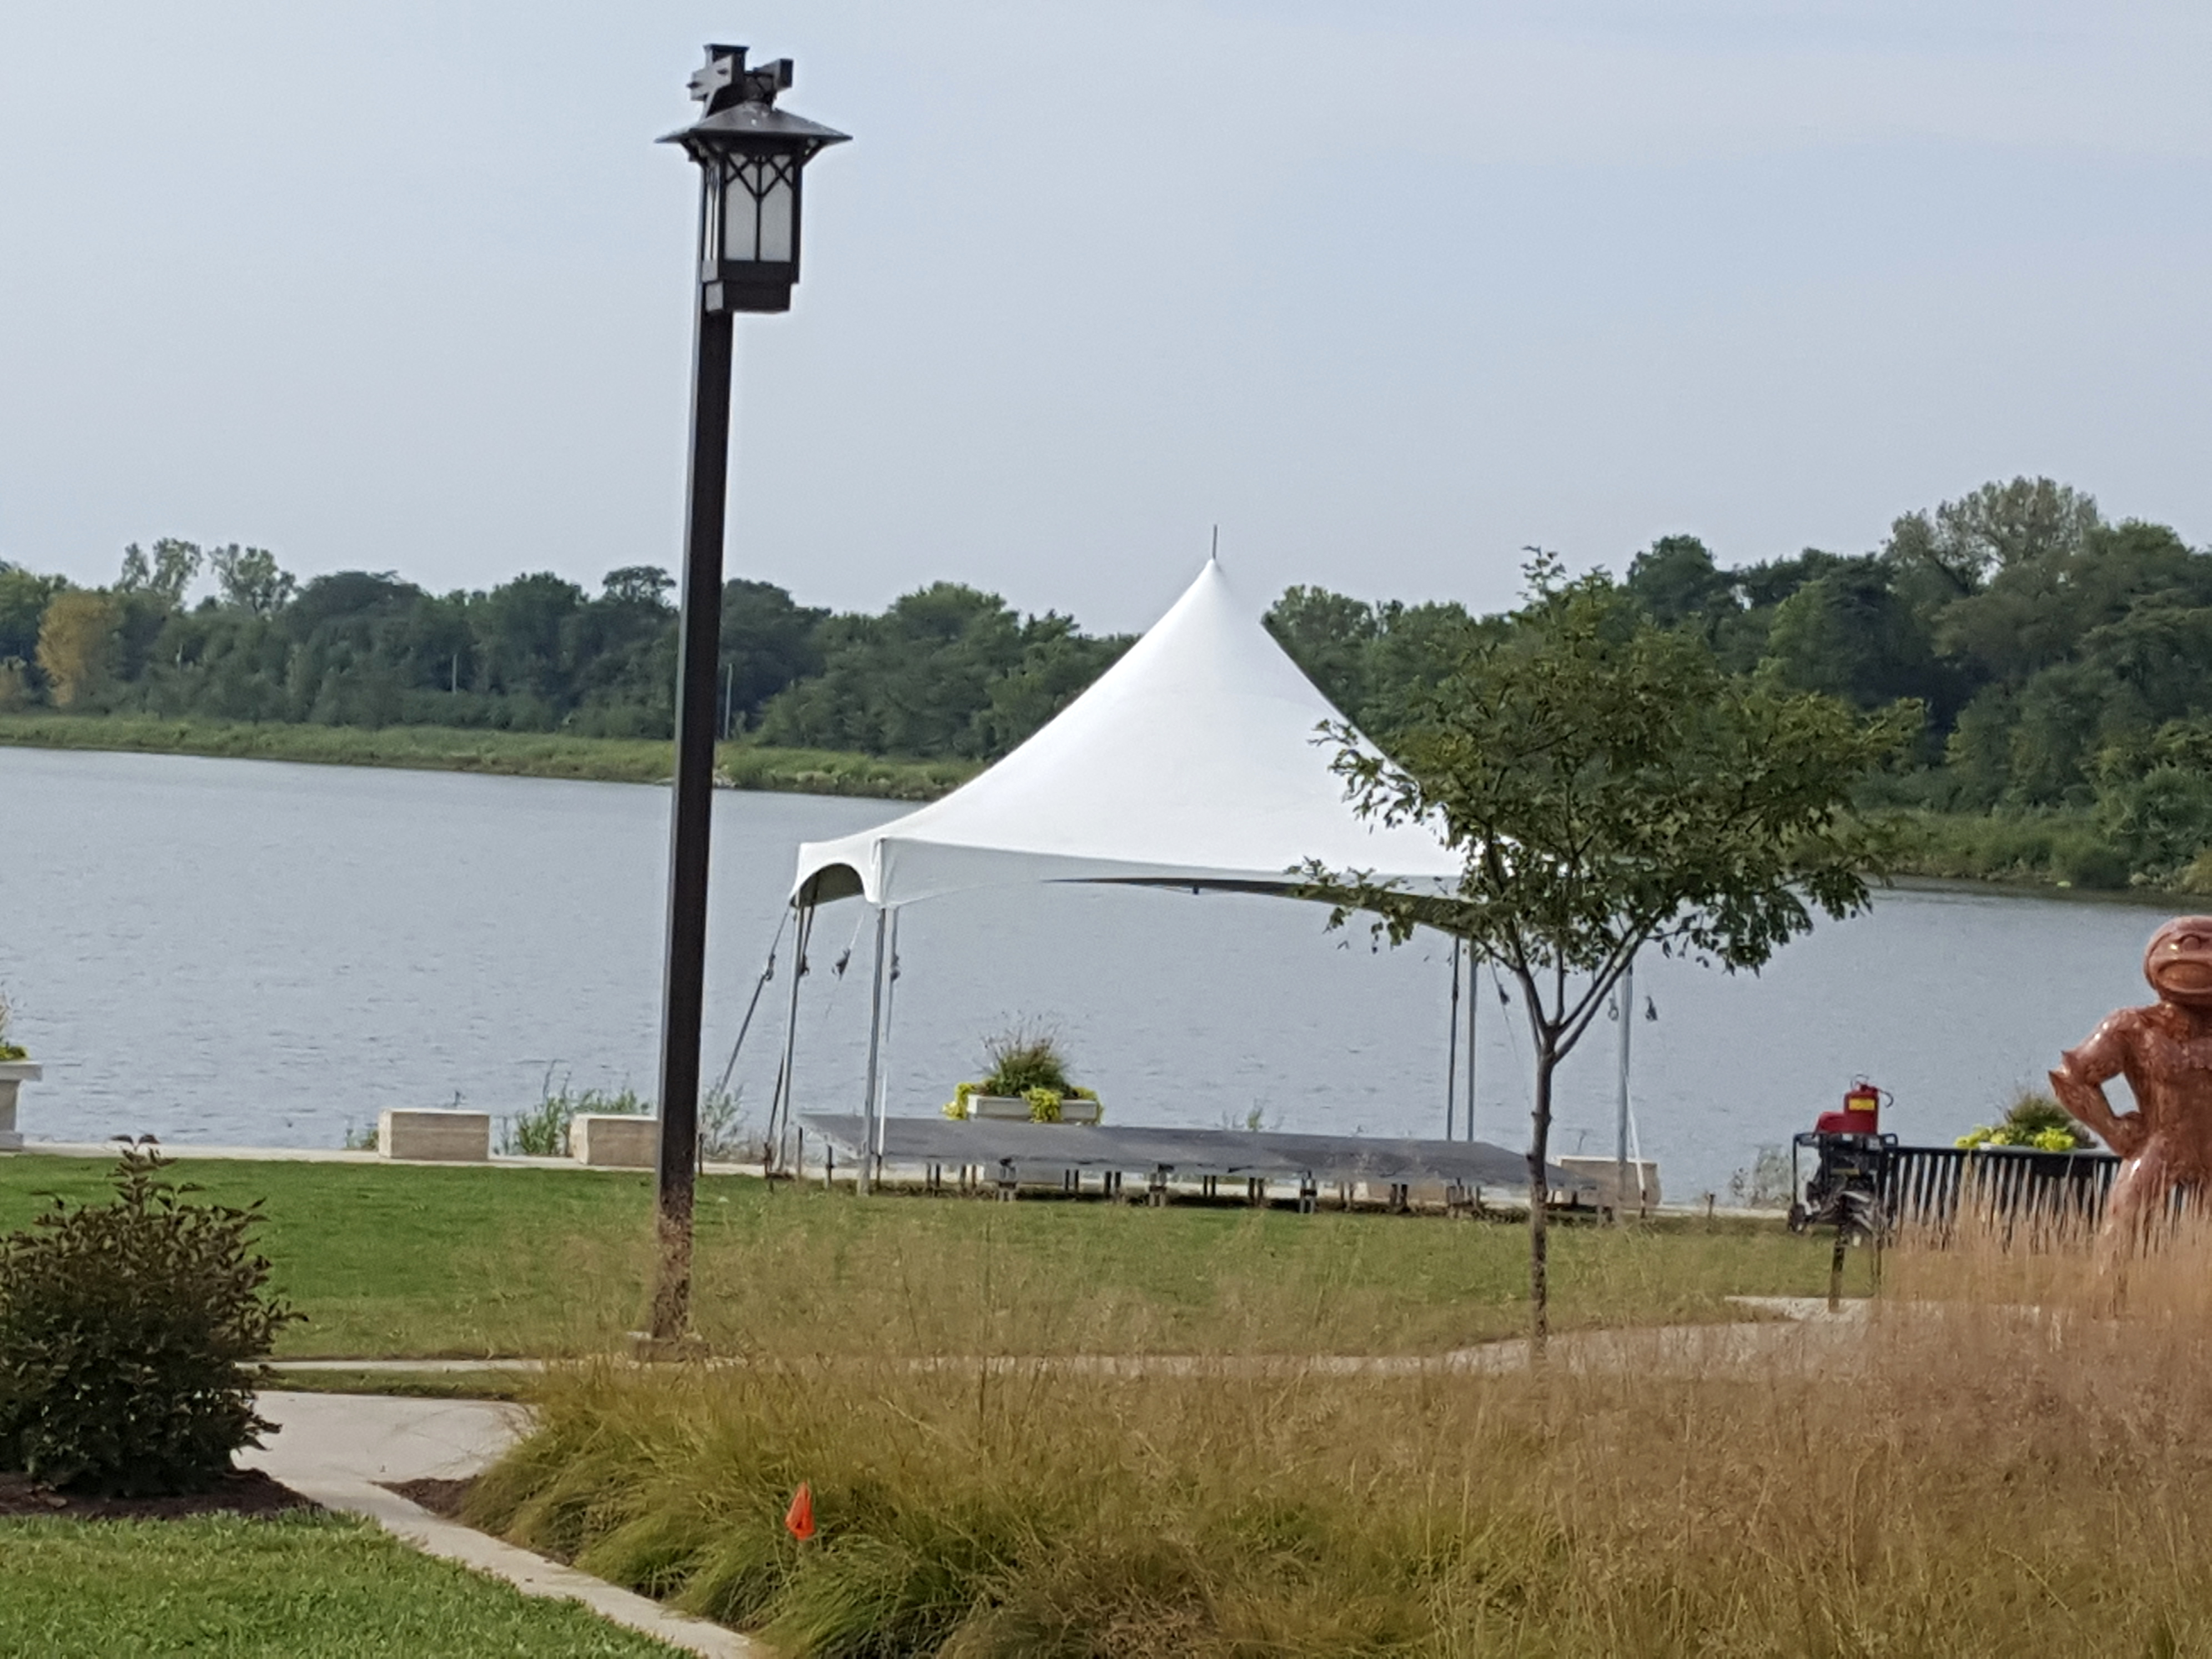 20' x 20' Tentnology tent with stage underneath at Terry Trueblood Recreation Area